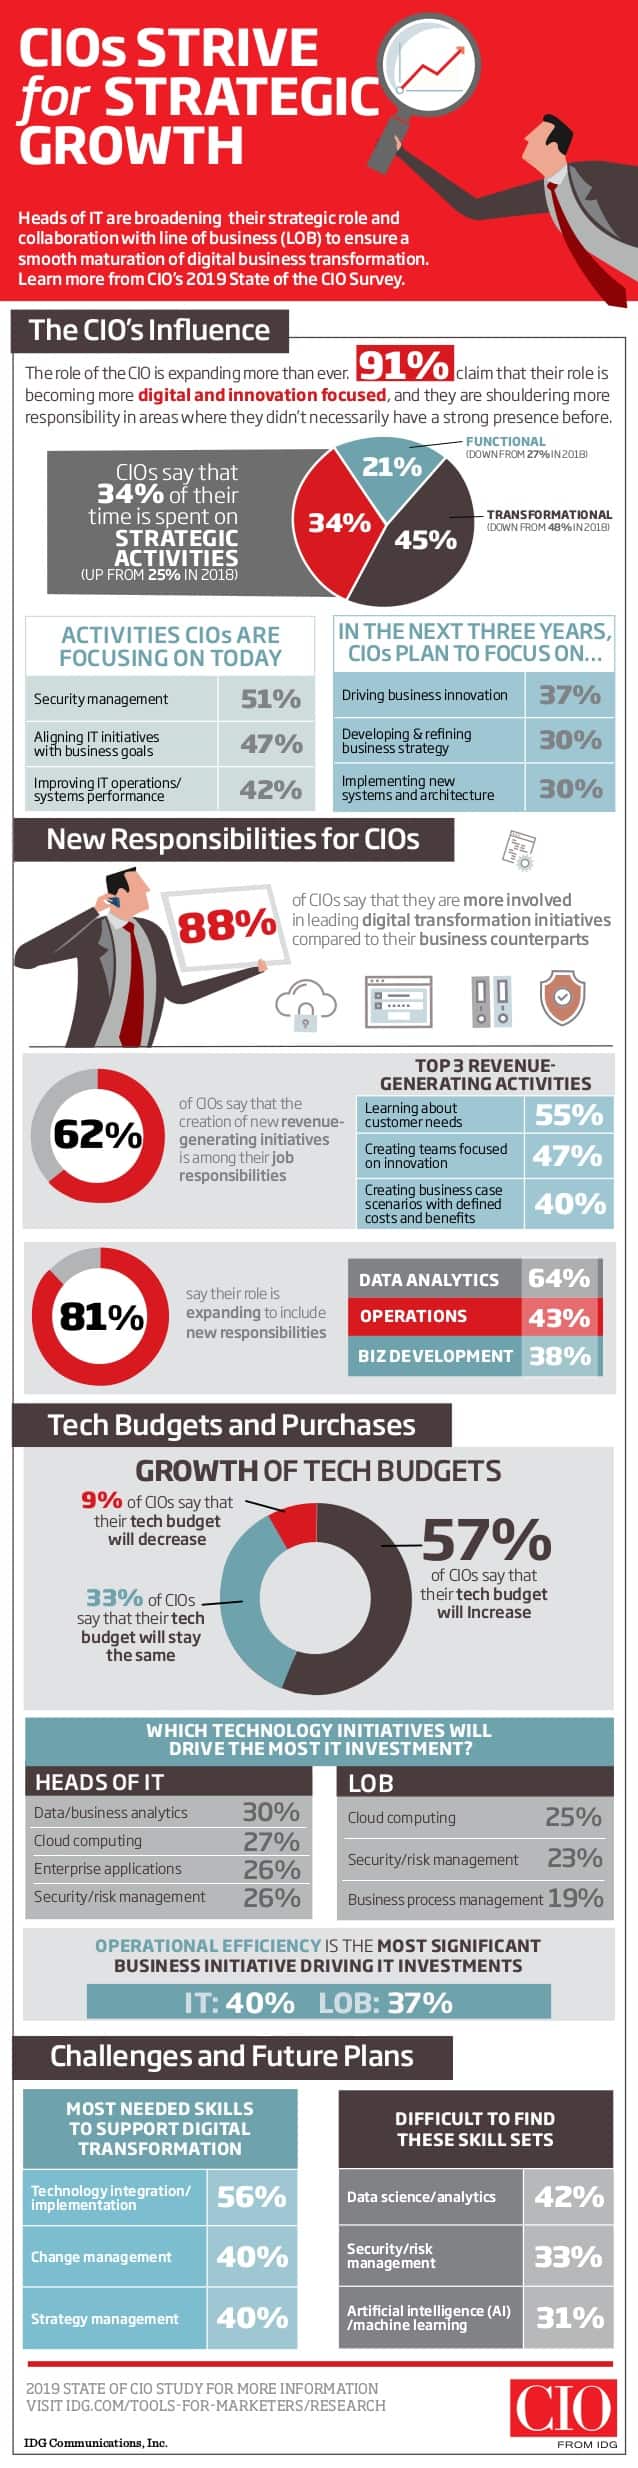 2019-state-of-the-cio-infographic-1-638